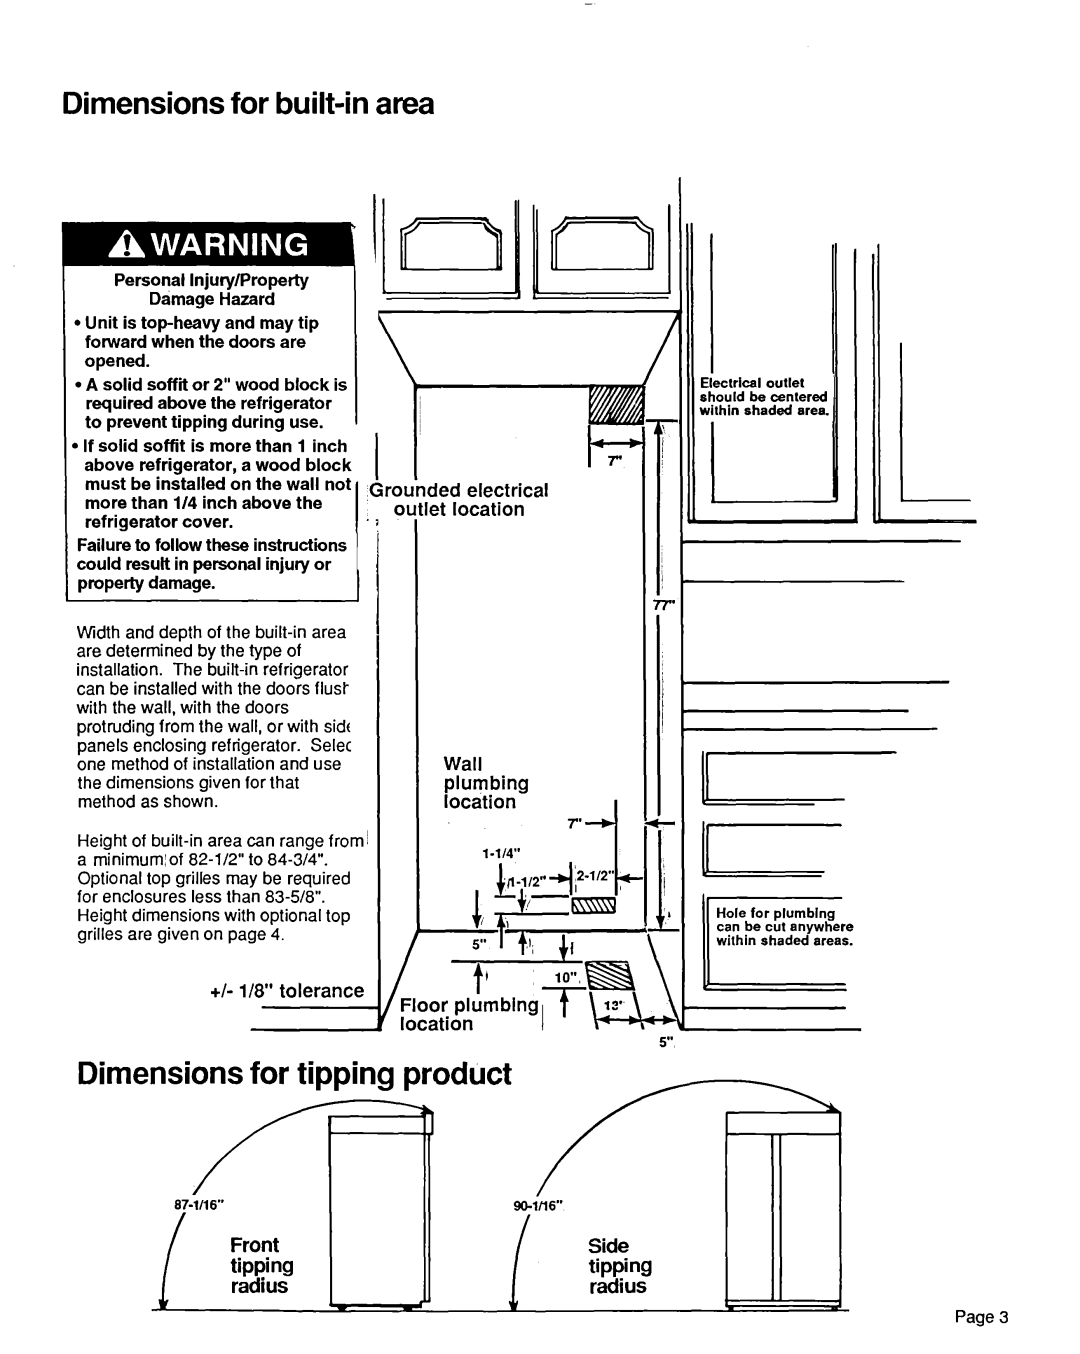 KitchenAid 2000491 Dimensions for built-in area, Dimensions for tippina pr, outslet, location, Wall, plumbing, loctition 